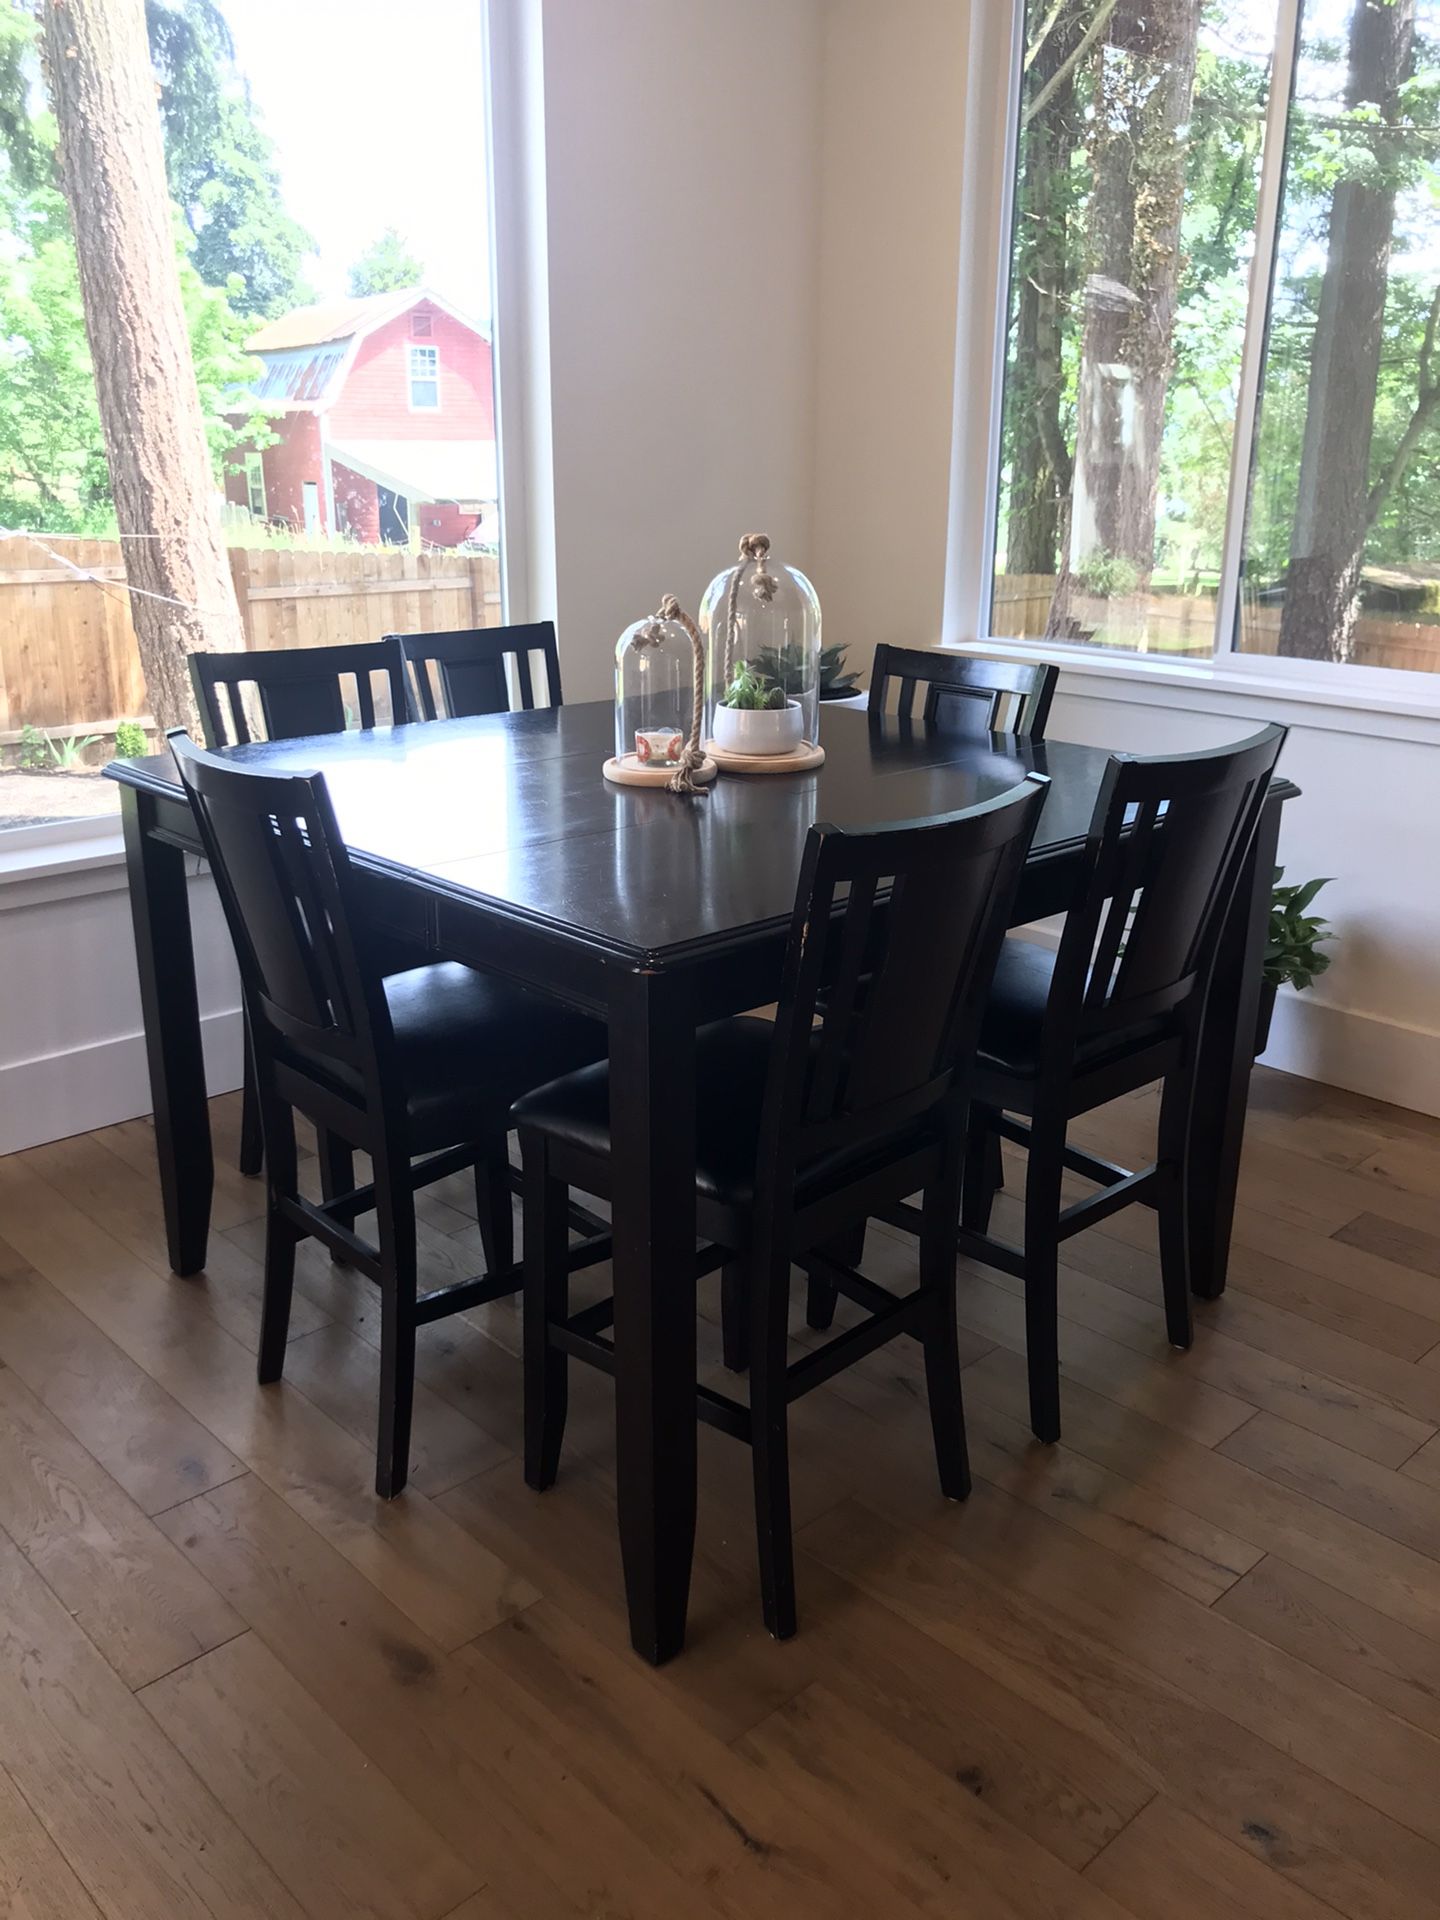 Dining table set- table with 6 chairs